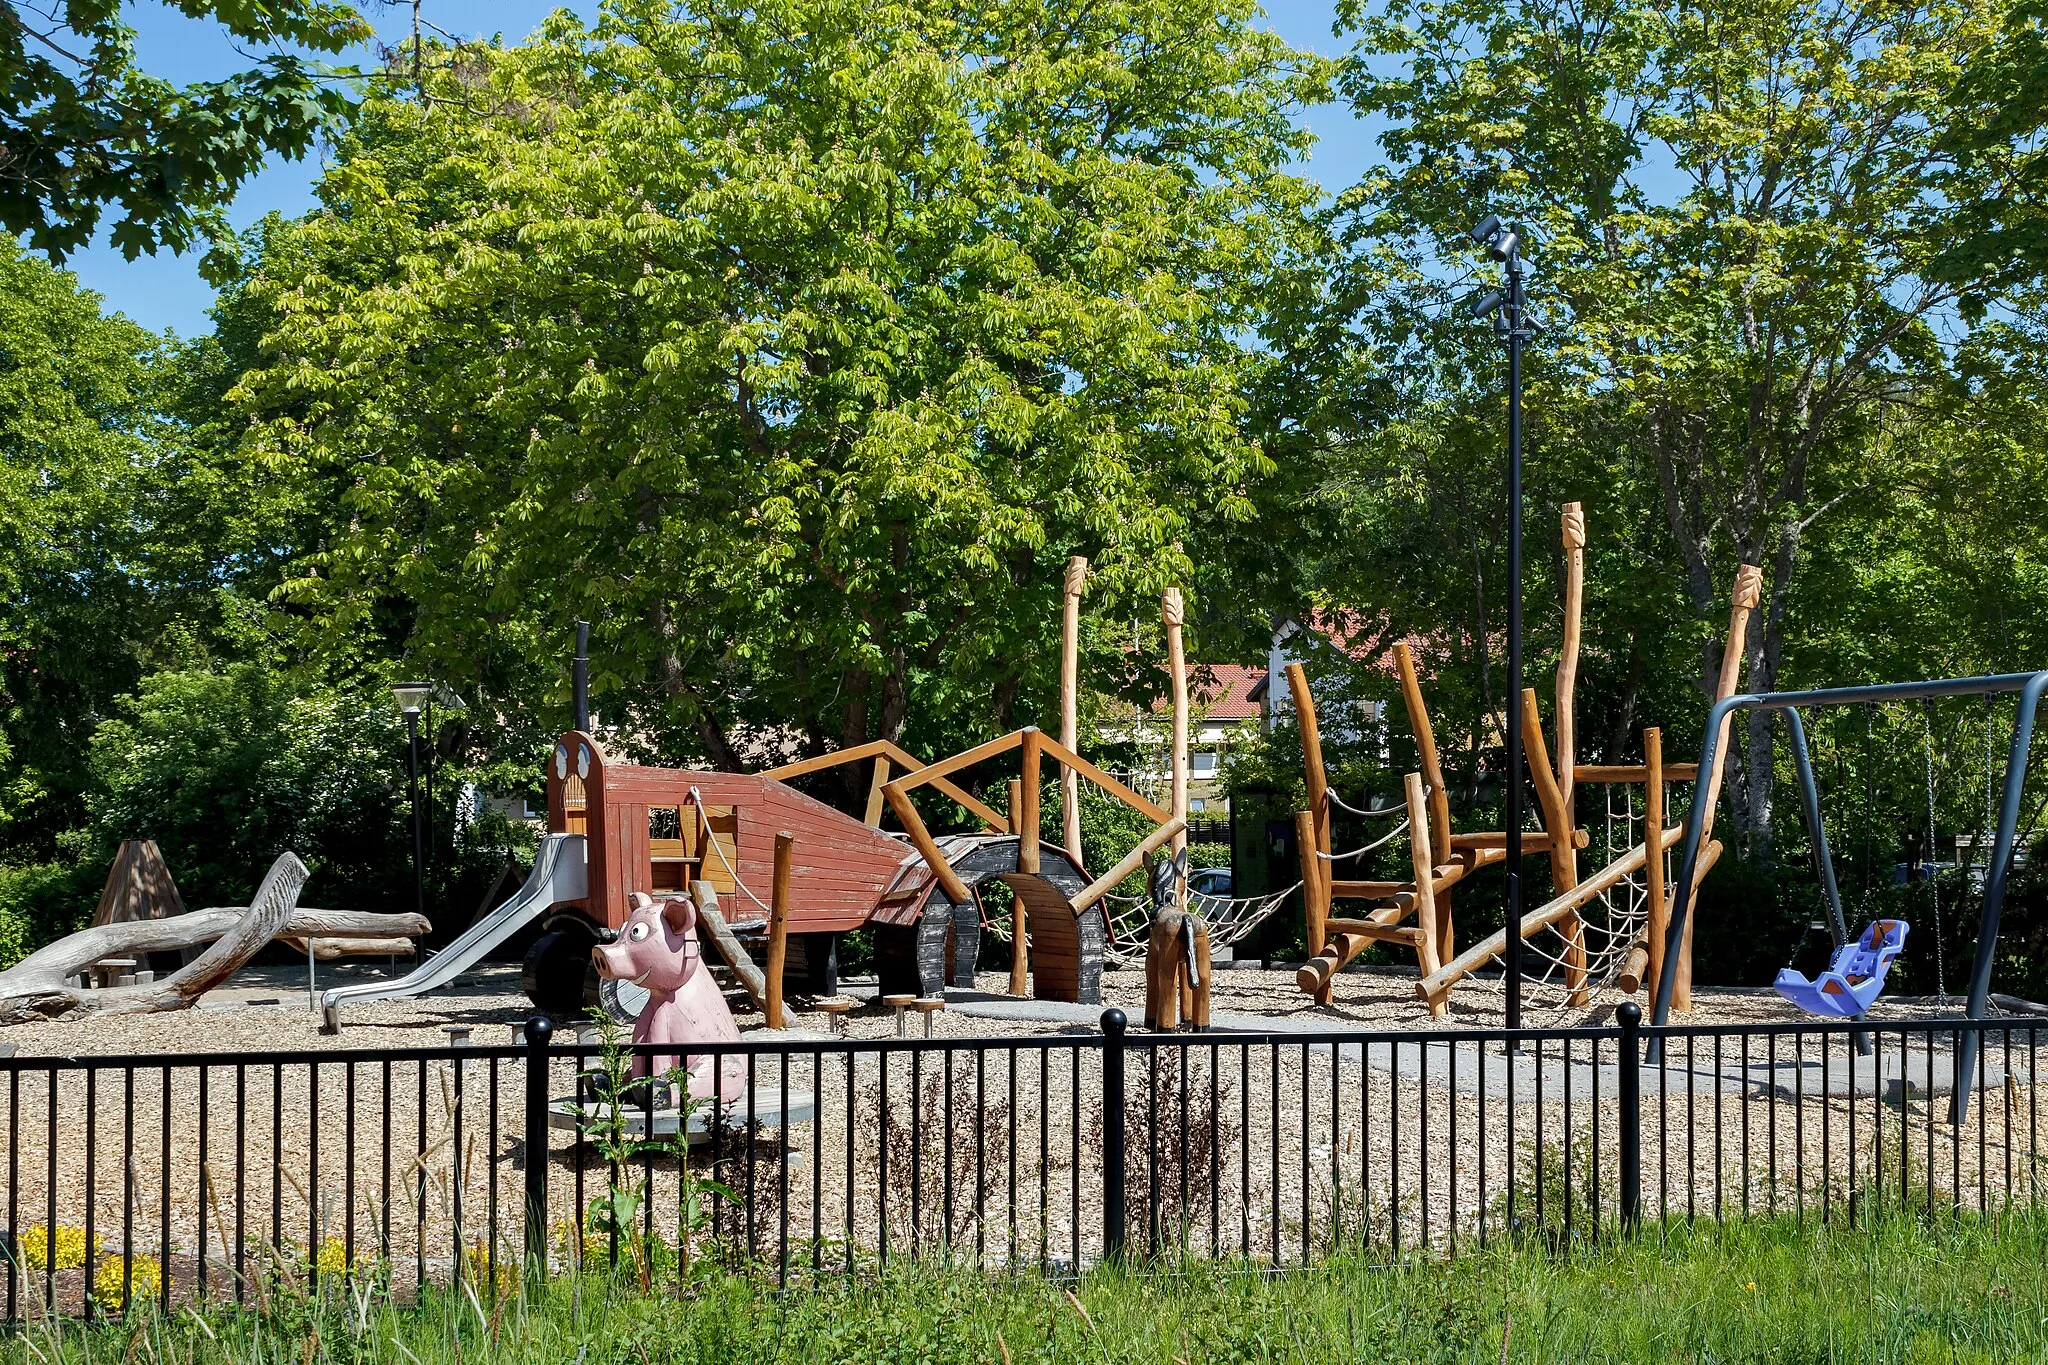 Photo showing: The farm-themed central playground in Brastad, Lysekil Municipality, Sweden. The playground was built in 2018, based on ideas and designs by the fifth-graders of the Stångenäs school. The playground is situated in Nyströms Park in central Brastad.